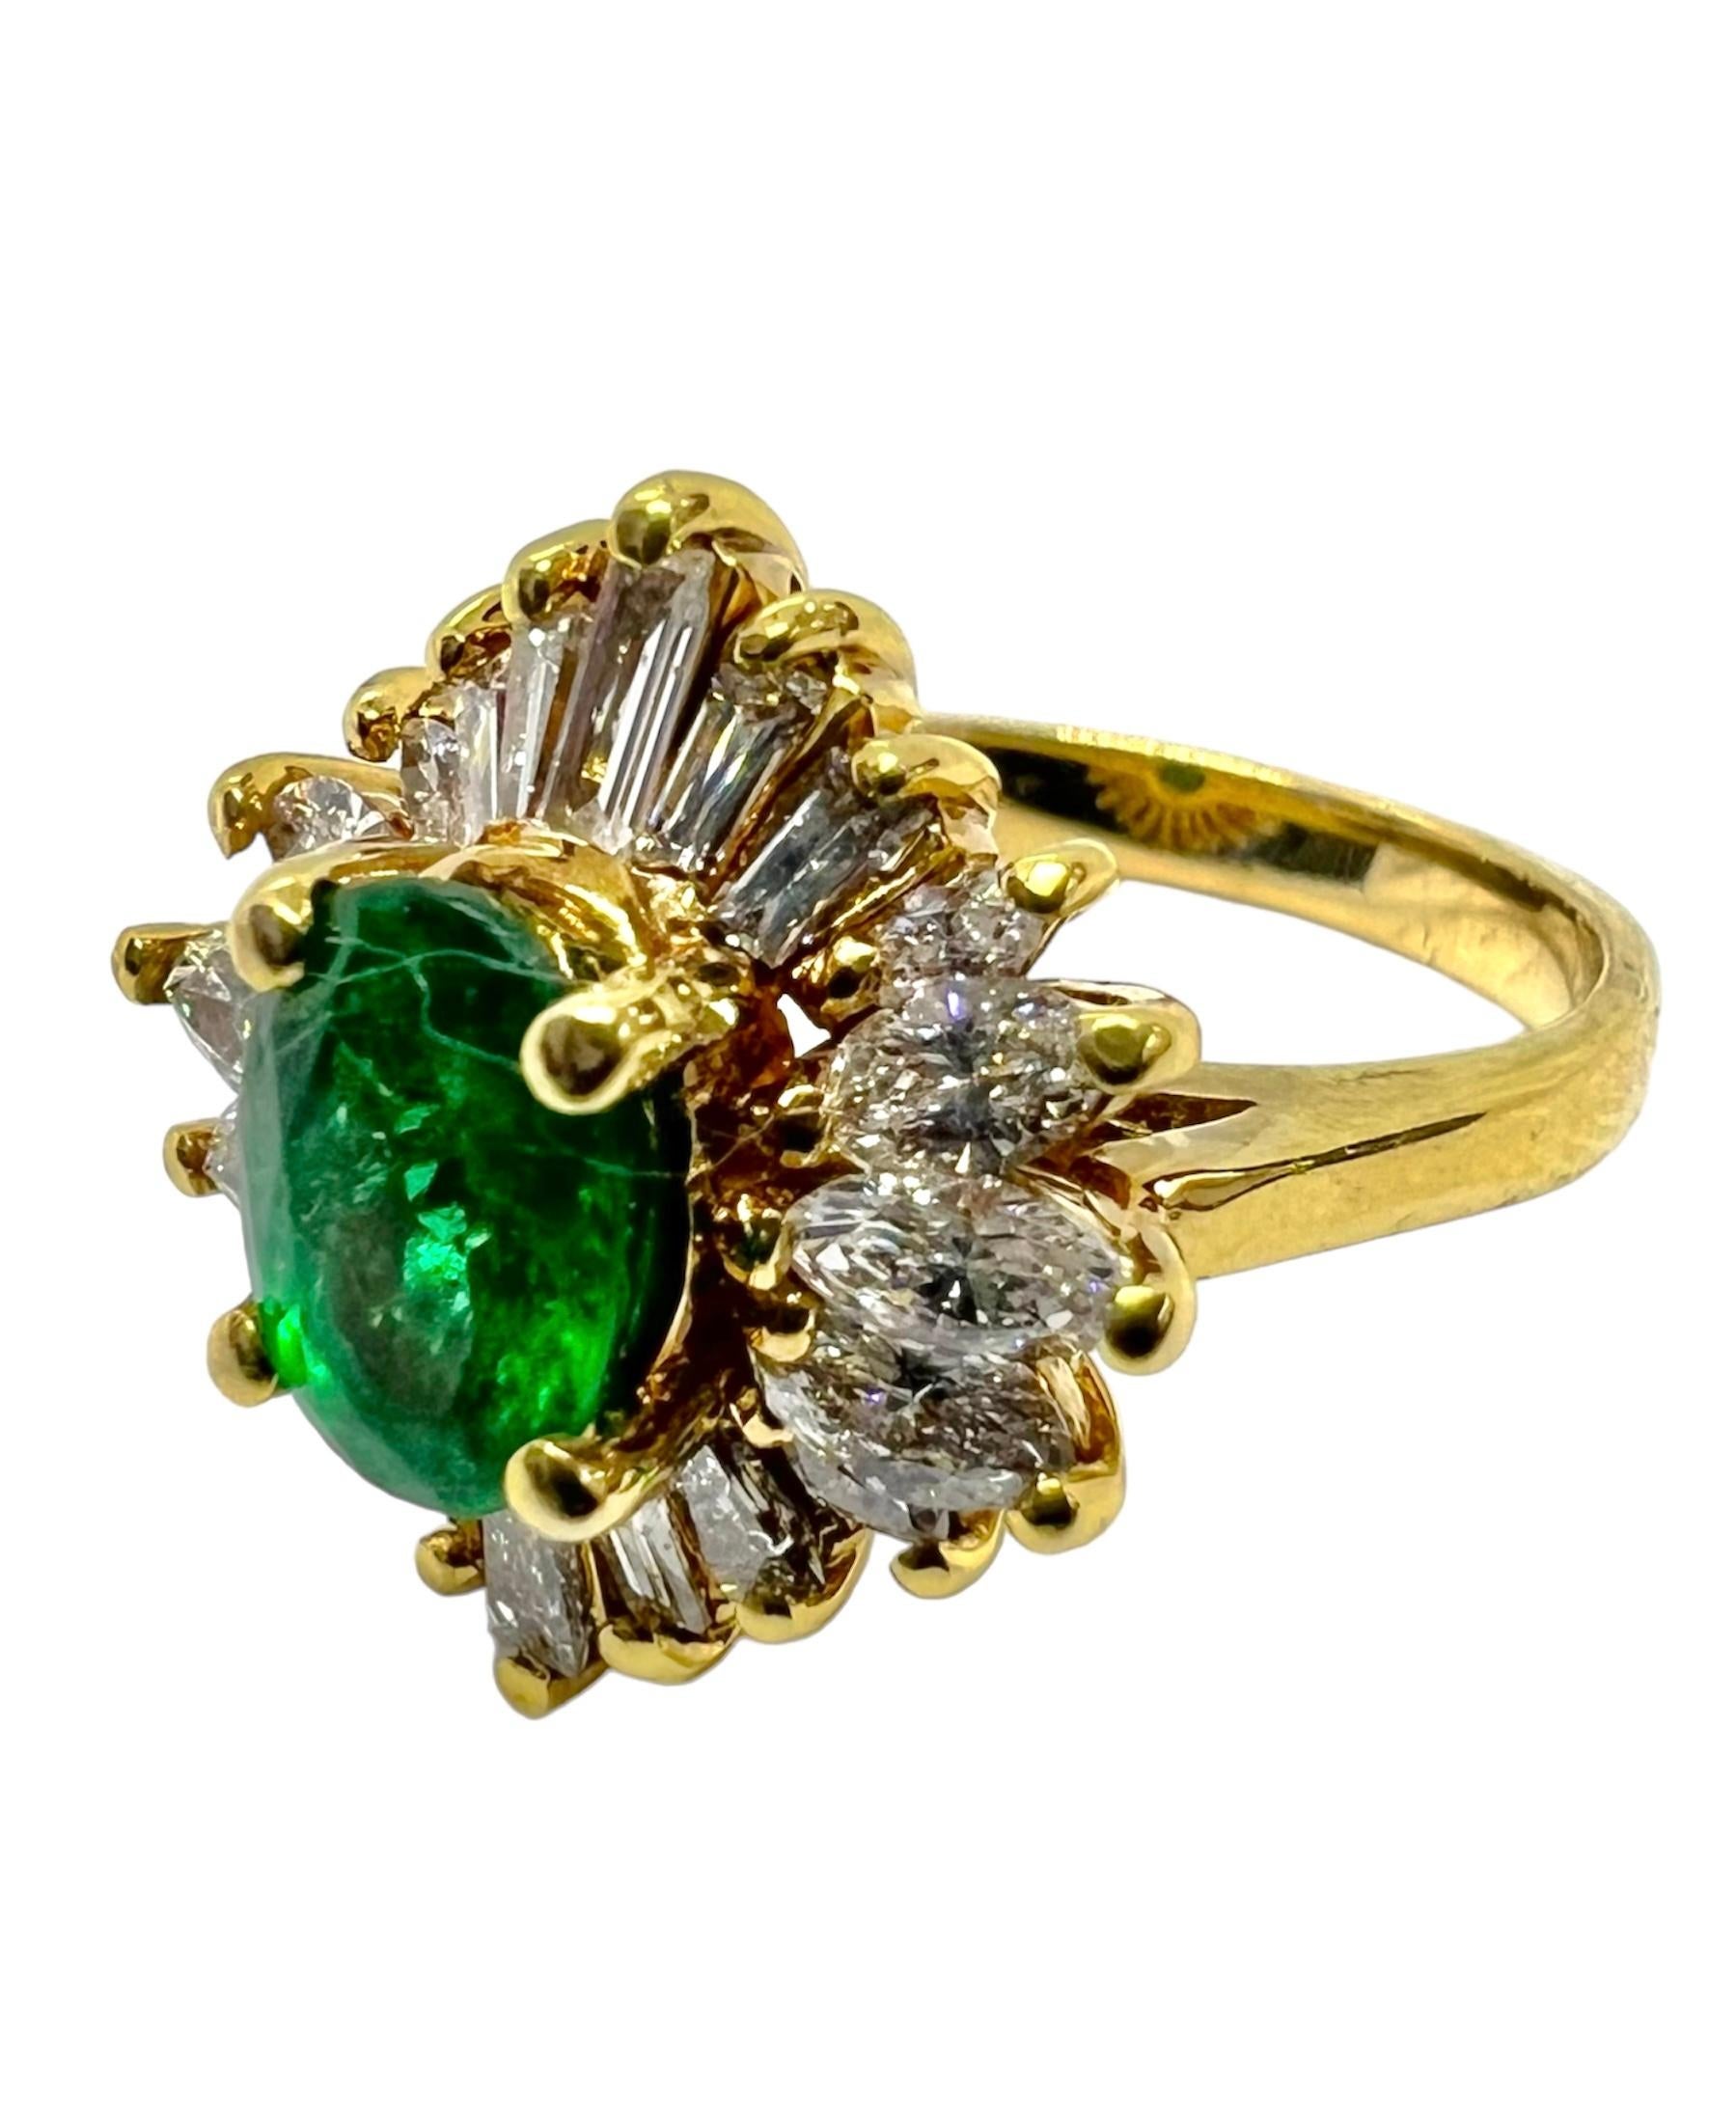 14K yellow gold with emerald center stone and diamonds.

Sophia D by Joseph Dardashti LTD has been known worldwide for 35 years and are inspired by classic Art Deco design that merges with modern manufacturing techniques.  